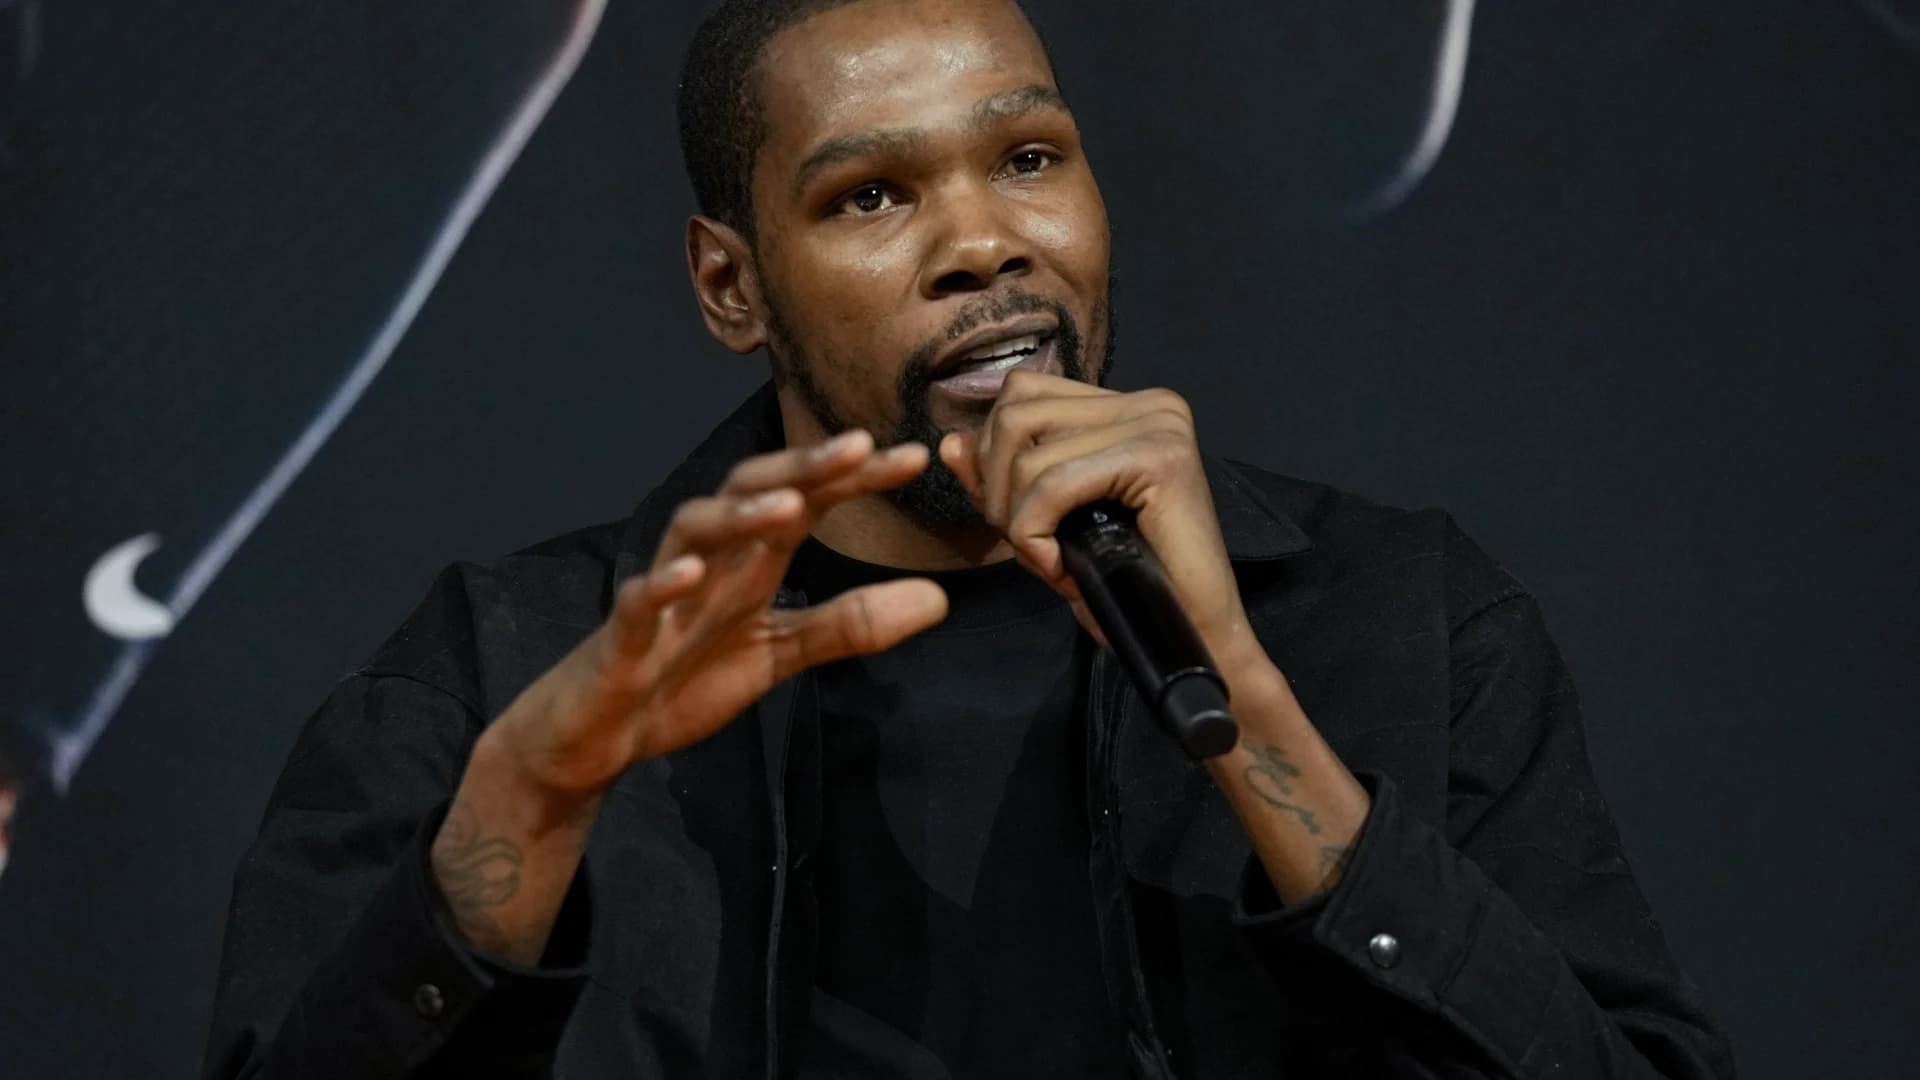 Durant cheered by fans, says Suns have ‘all the pieces’